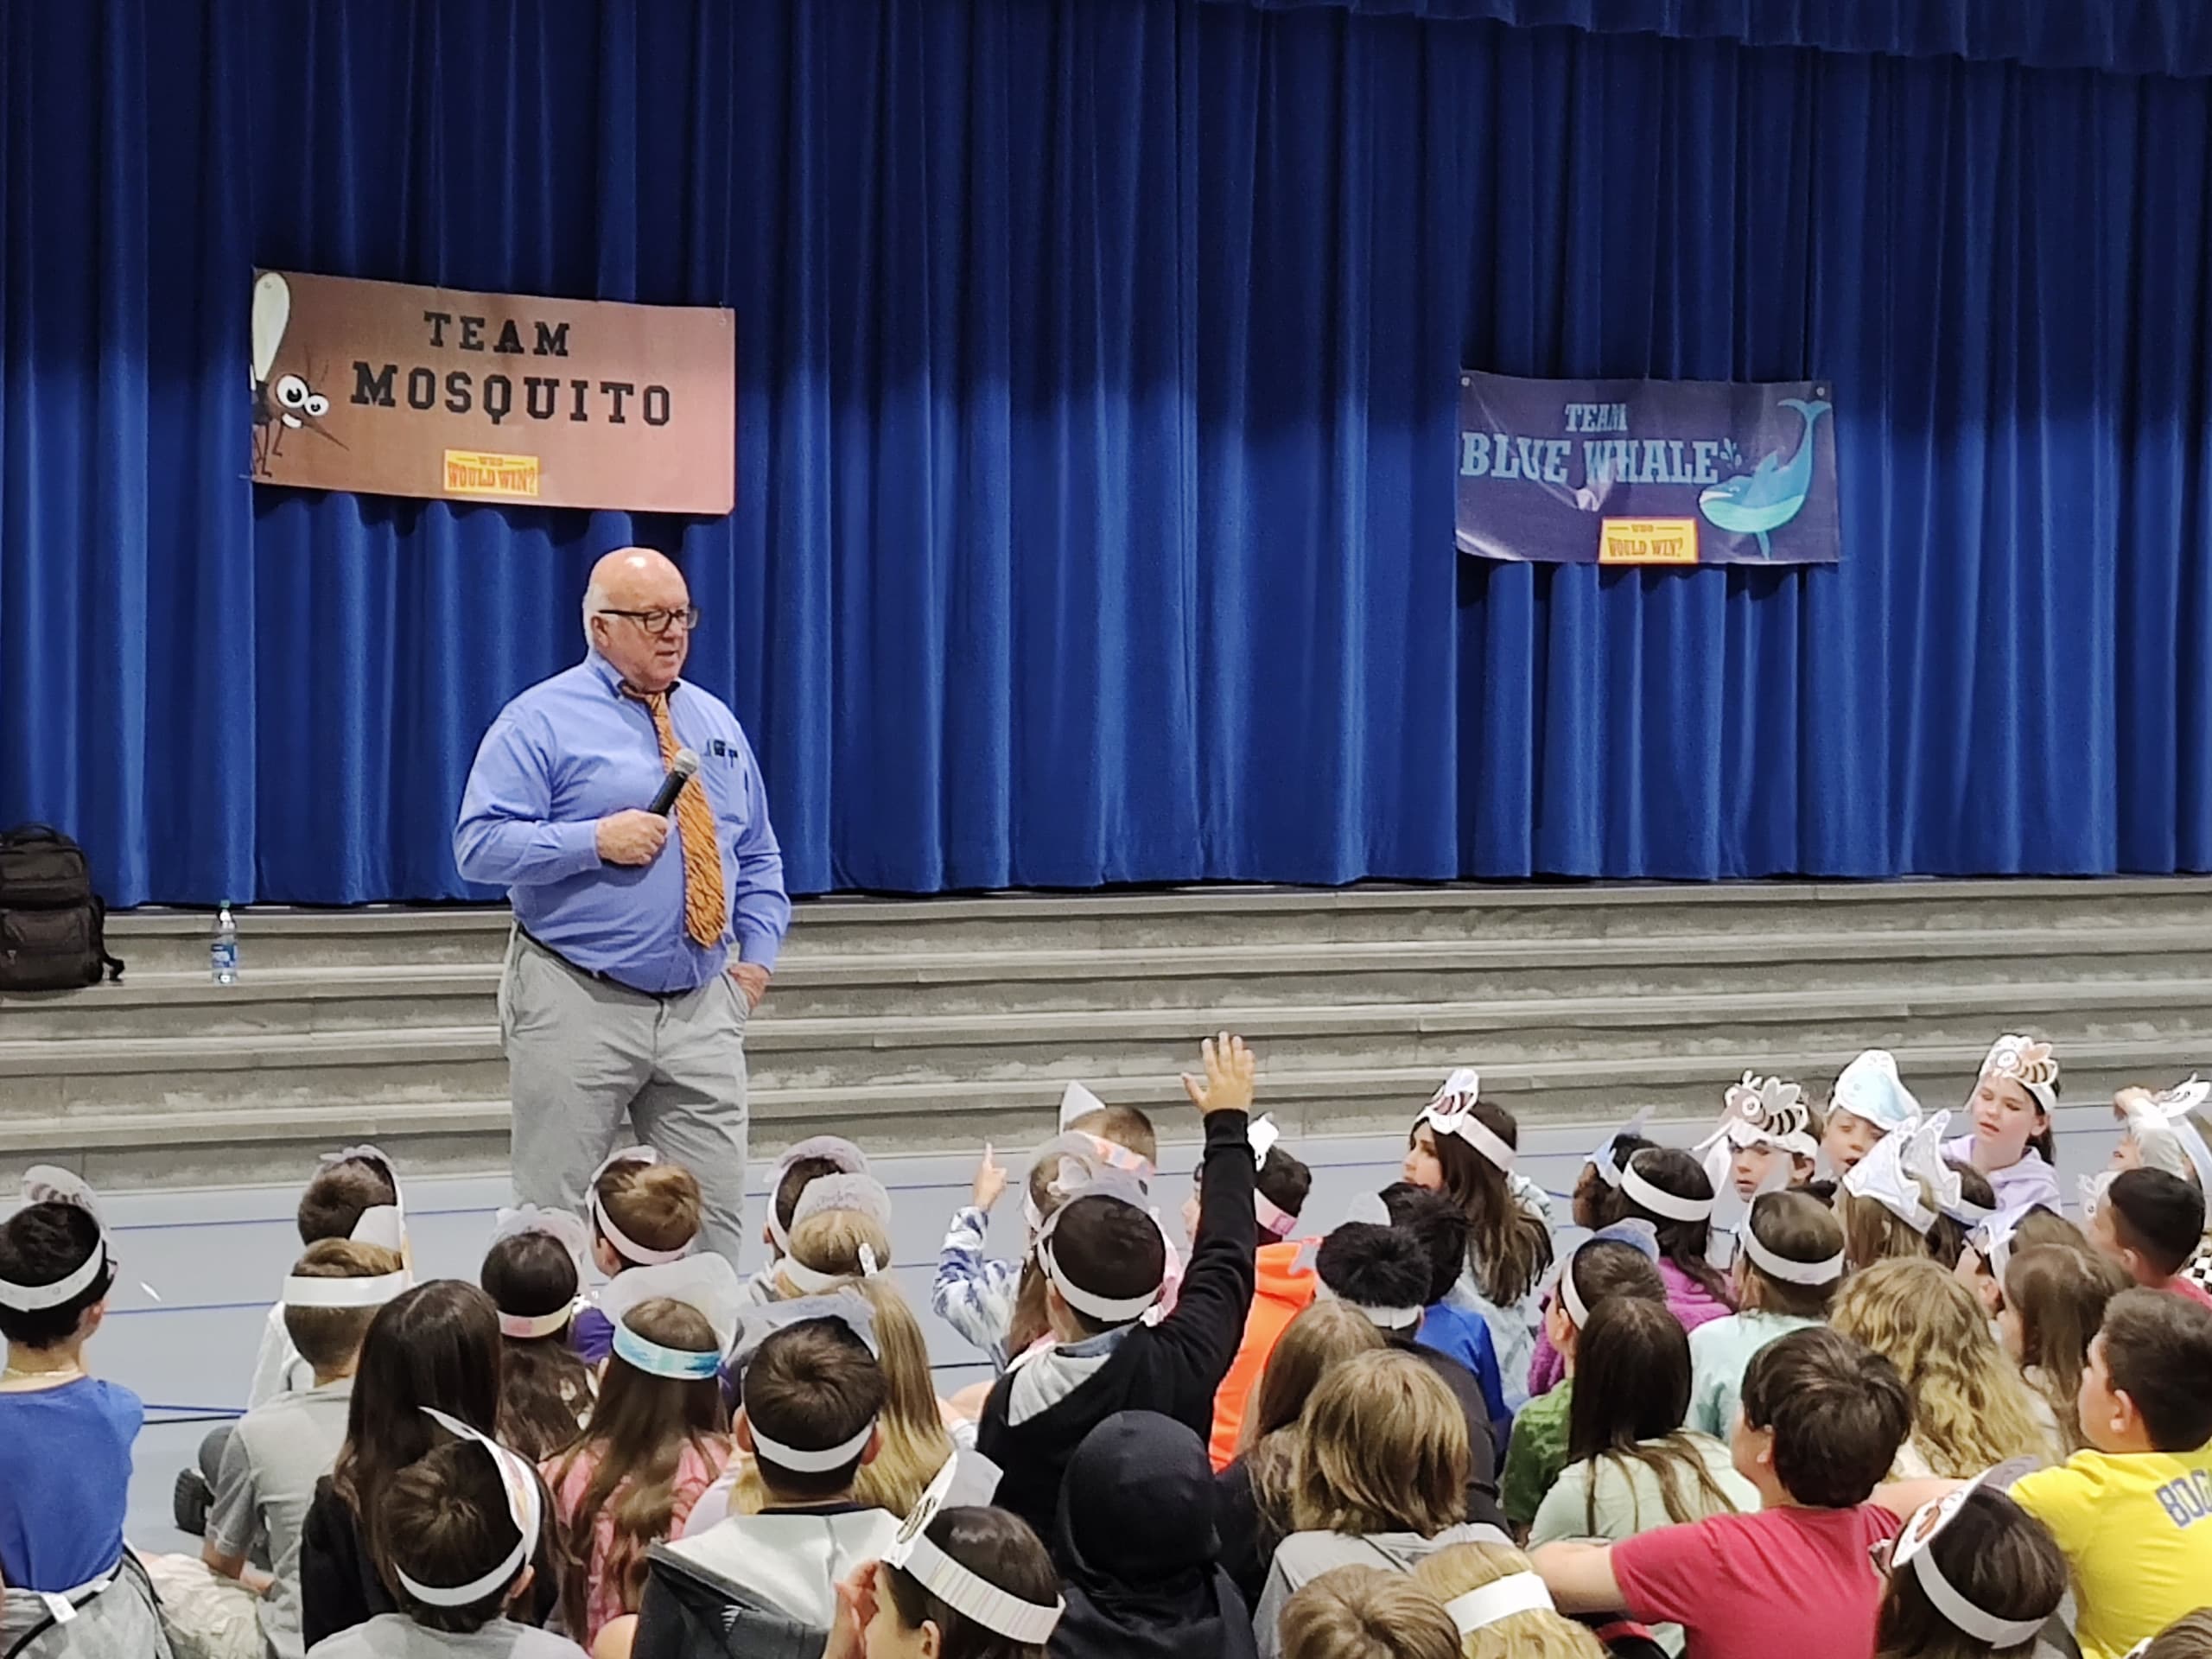 It was so exciting to have Jerry Pallotta visit Kolling. The students enjoyed a presentation from the Who would win author on May 16.